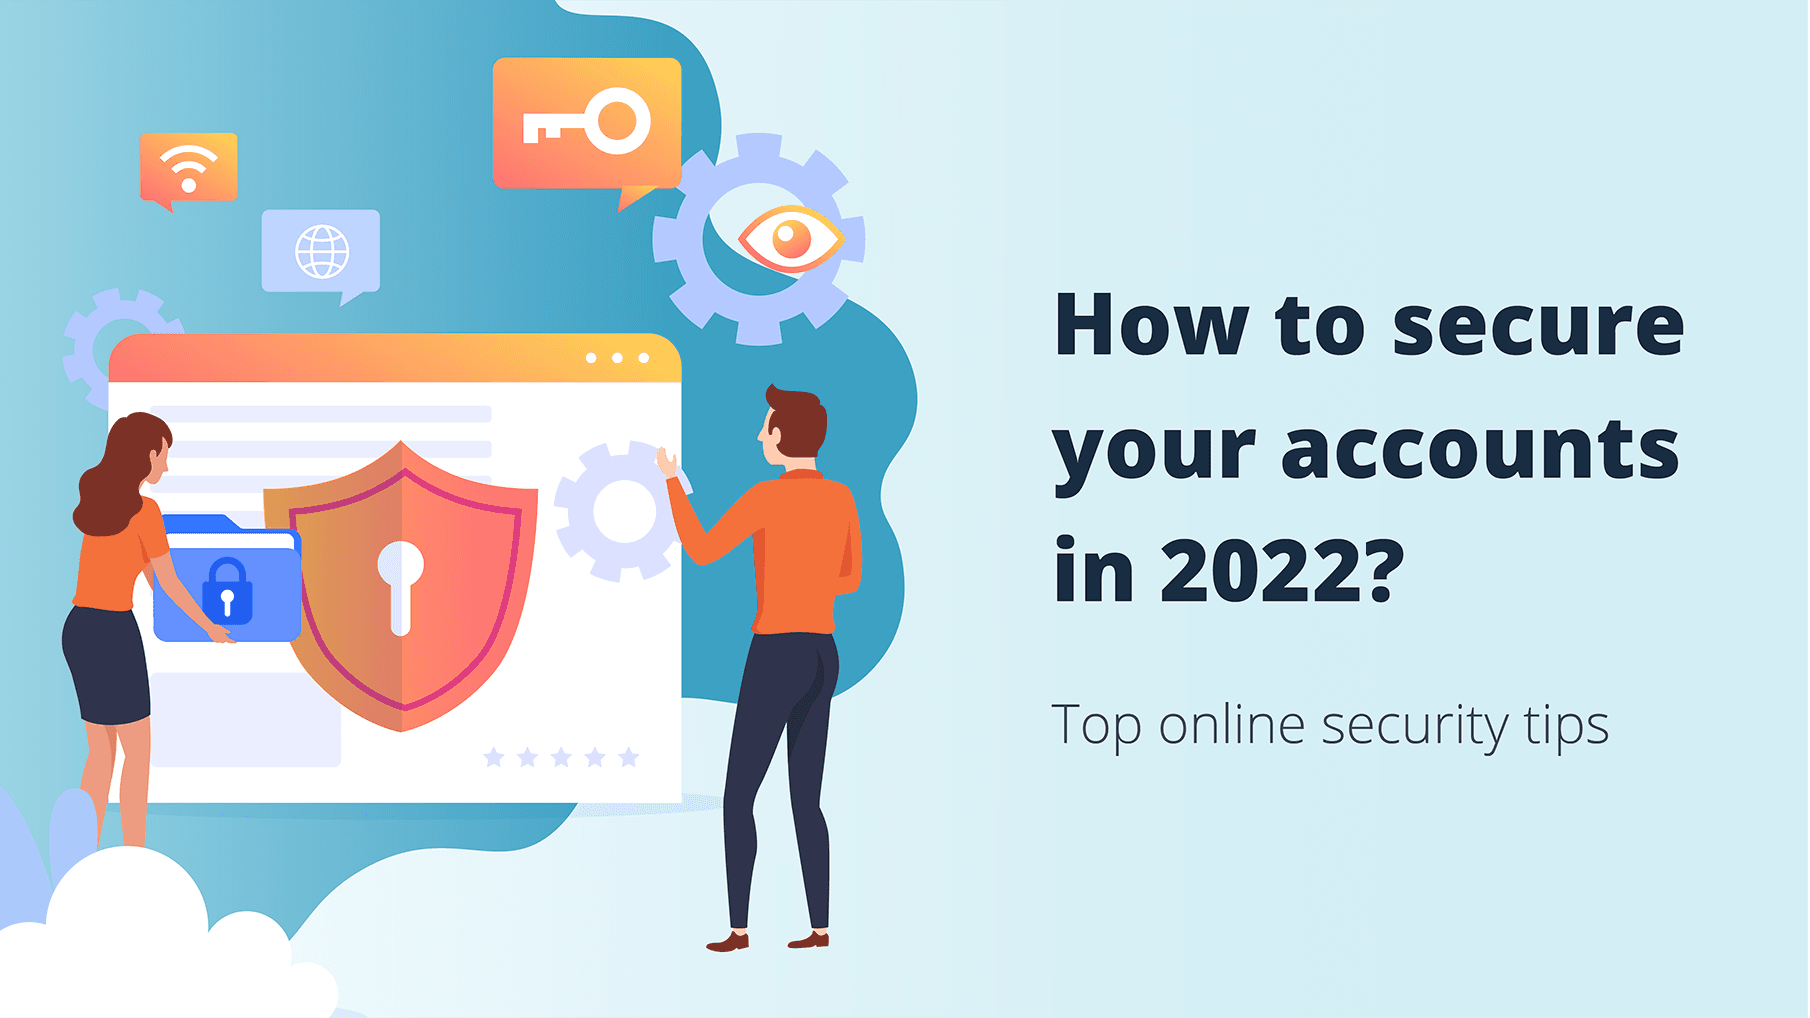 <b> How to Secure your Accounts in 2022? Top Online Security Tips </b>